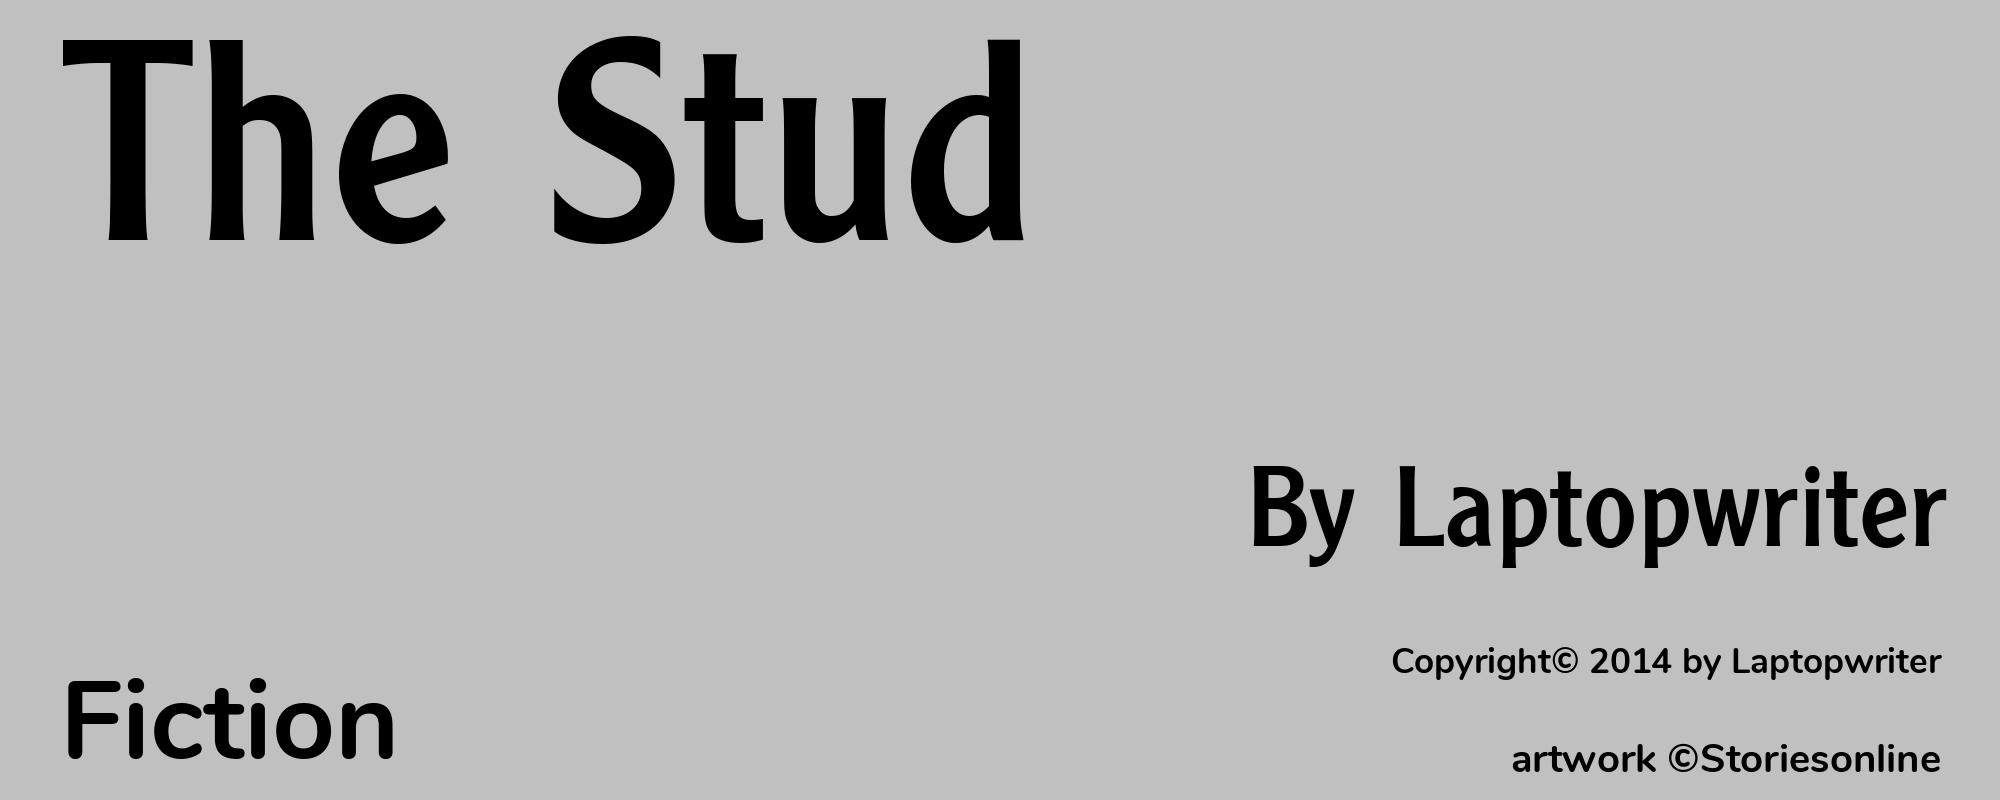 The Stud - Cover